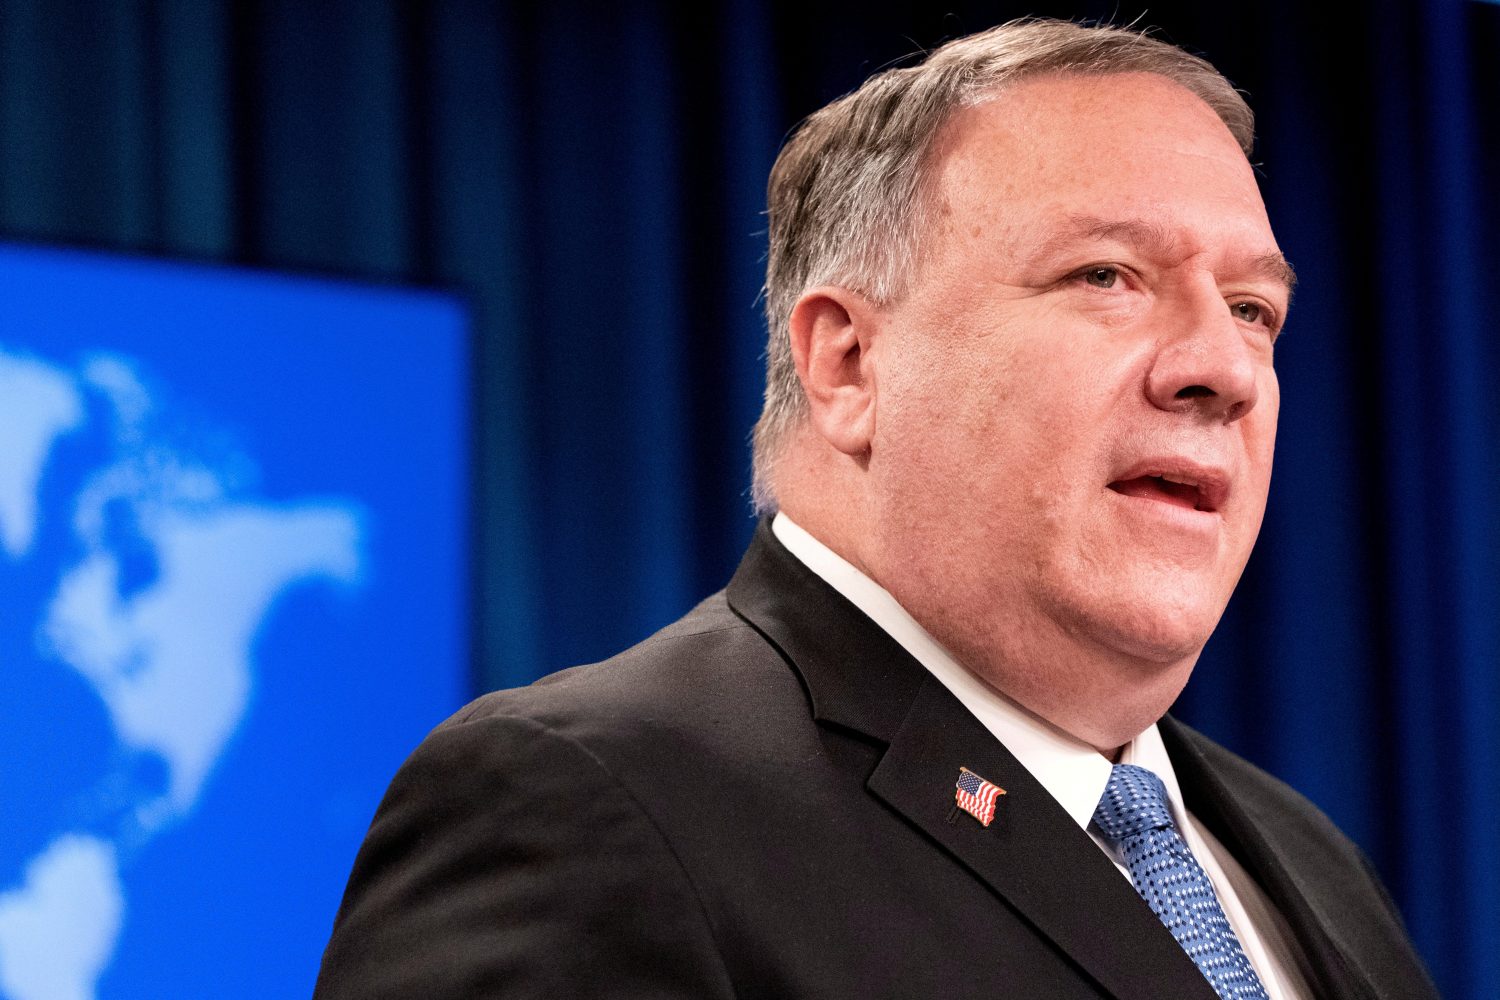 FILE PHOTO: U.S. Secretary of State Mike Pompeo speaks during a media briefing at the State Department in Washington, U.S., November 10, 2020. Jacquelyn Martin/Pool via REUTERS/File Photo